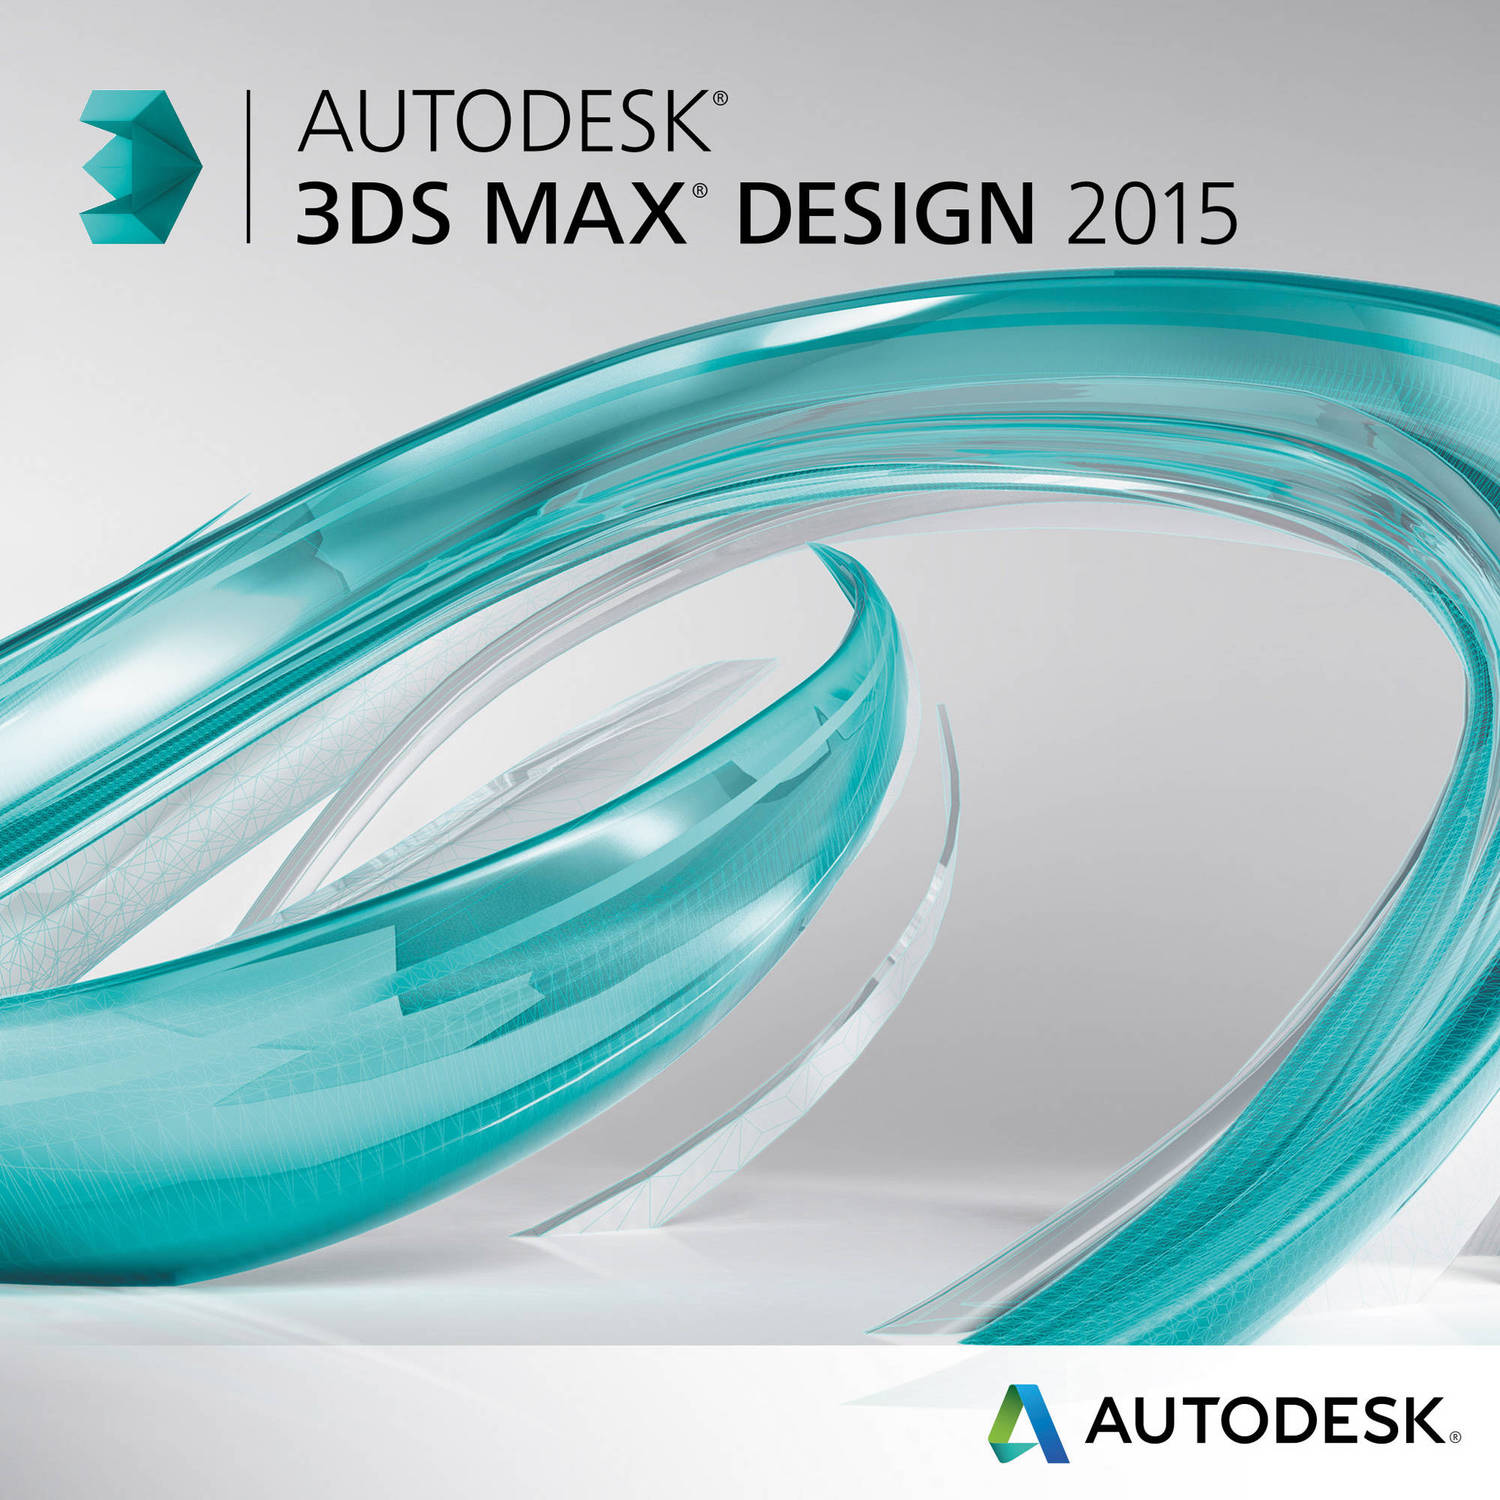 3ds max 2015 software free download full version 64 bit